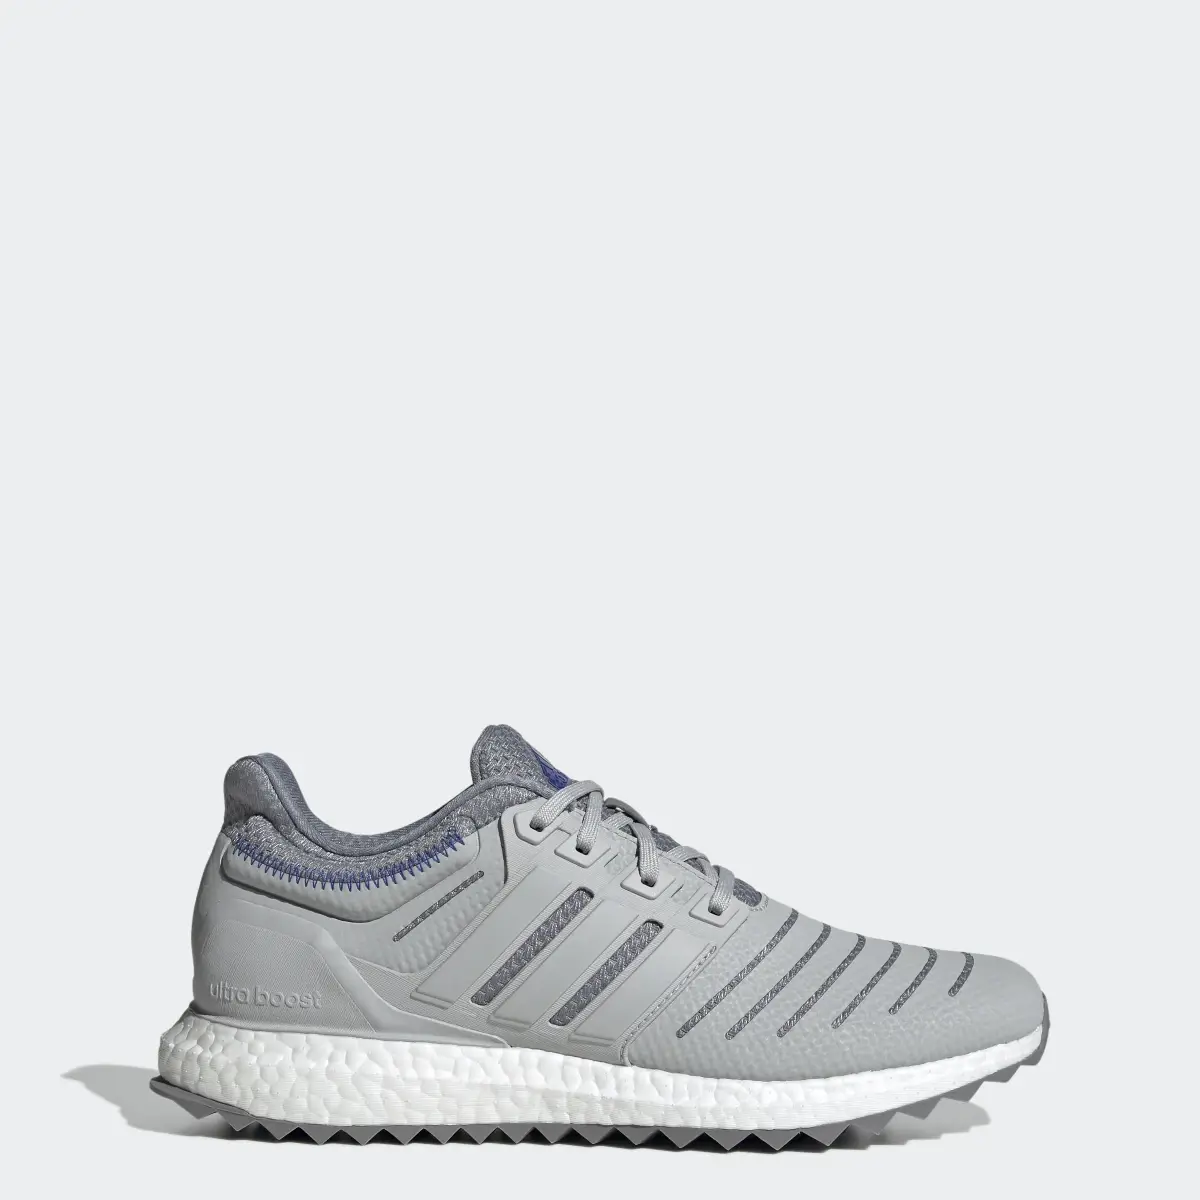 Adidas Ultraboost DNA XXII Lifestyle Running Sportswear Capsule Collection Shoes. 1